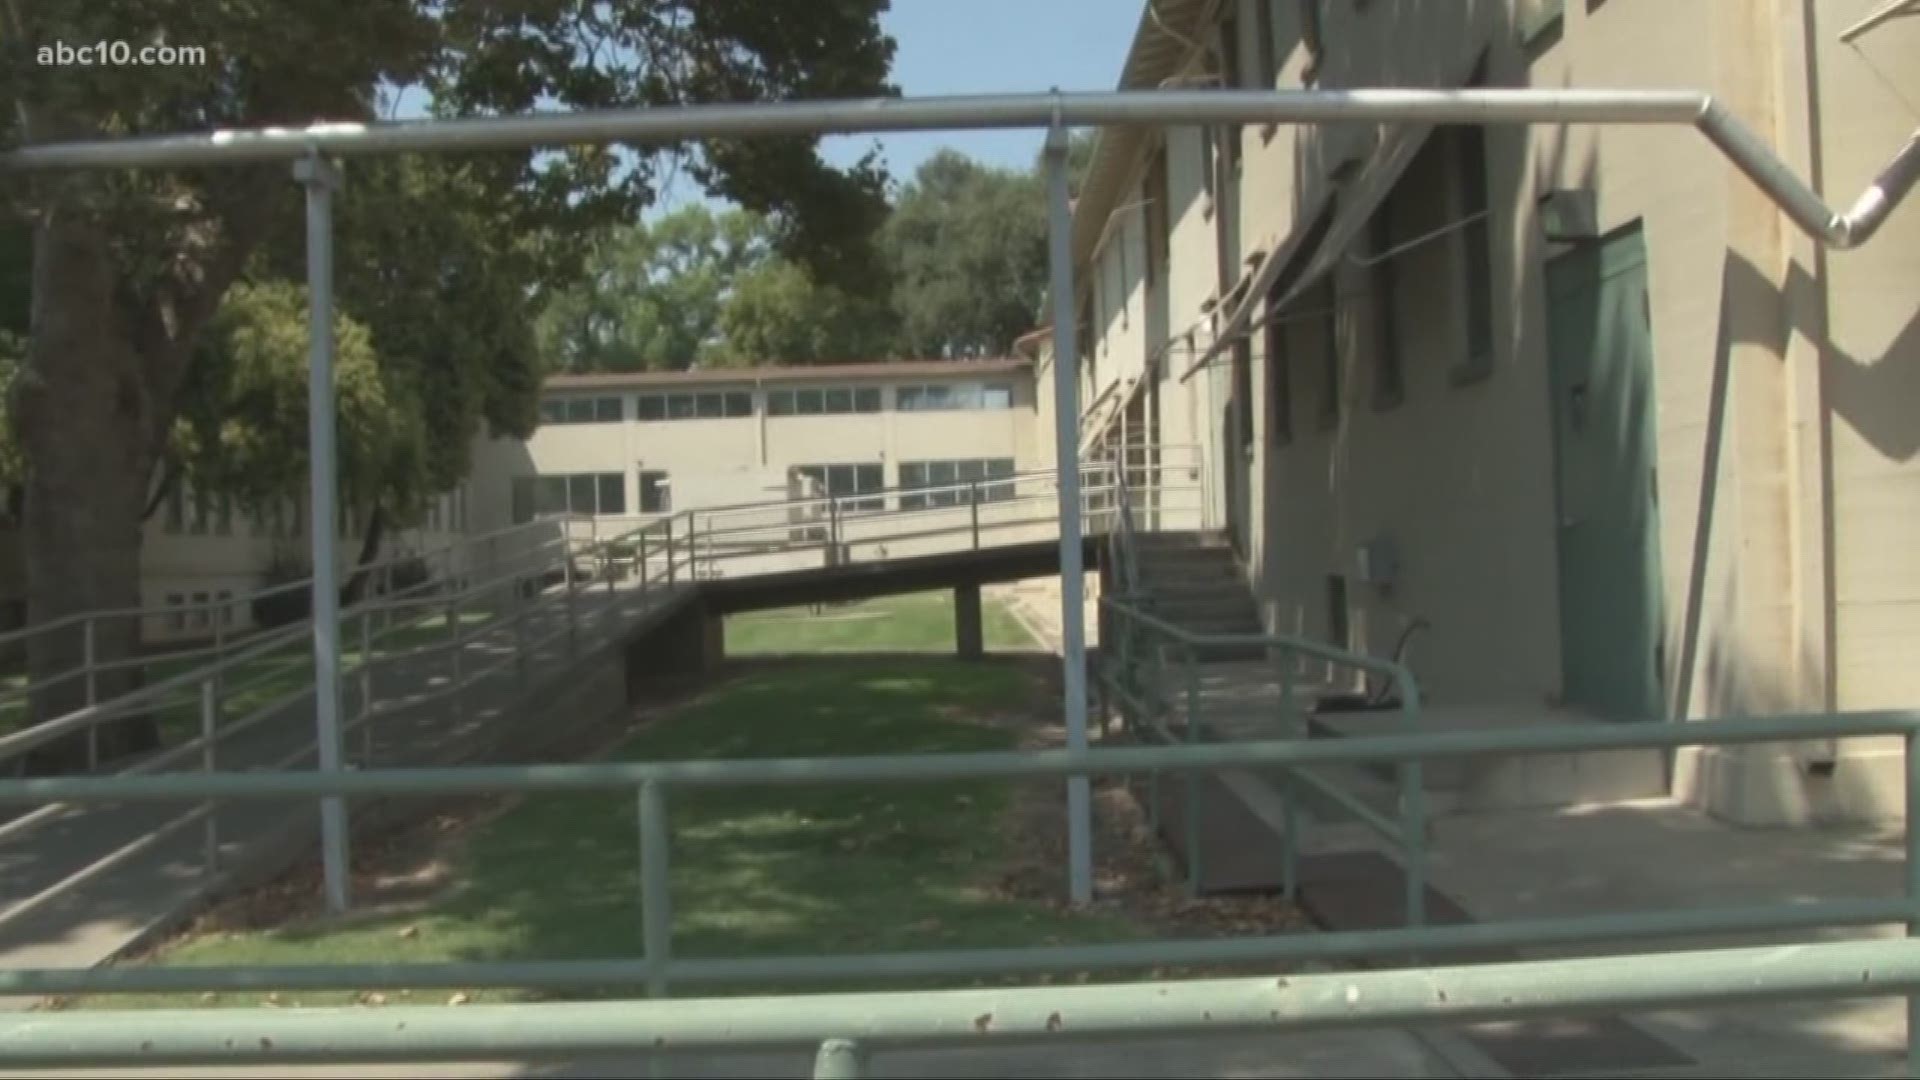 Stanislaus County officials are looking to put an emergency shelter in a former hospital.